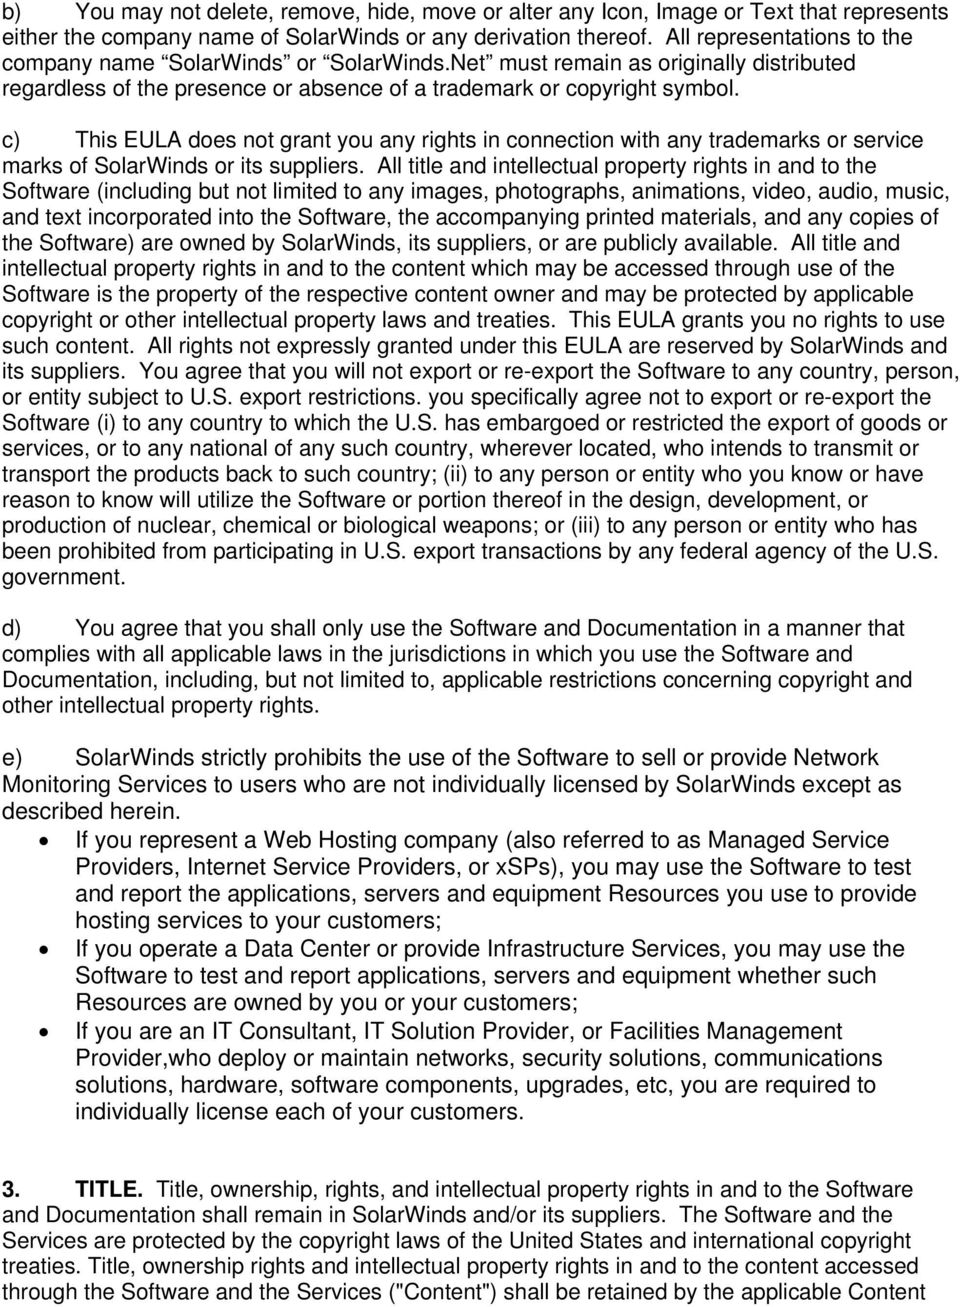 c) This EULA does not grant you any rights in connection with any trademarks or service marks of SolarWinds or its suppliers.